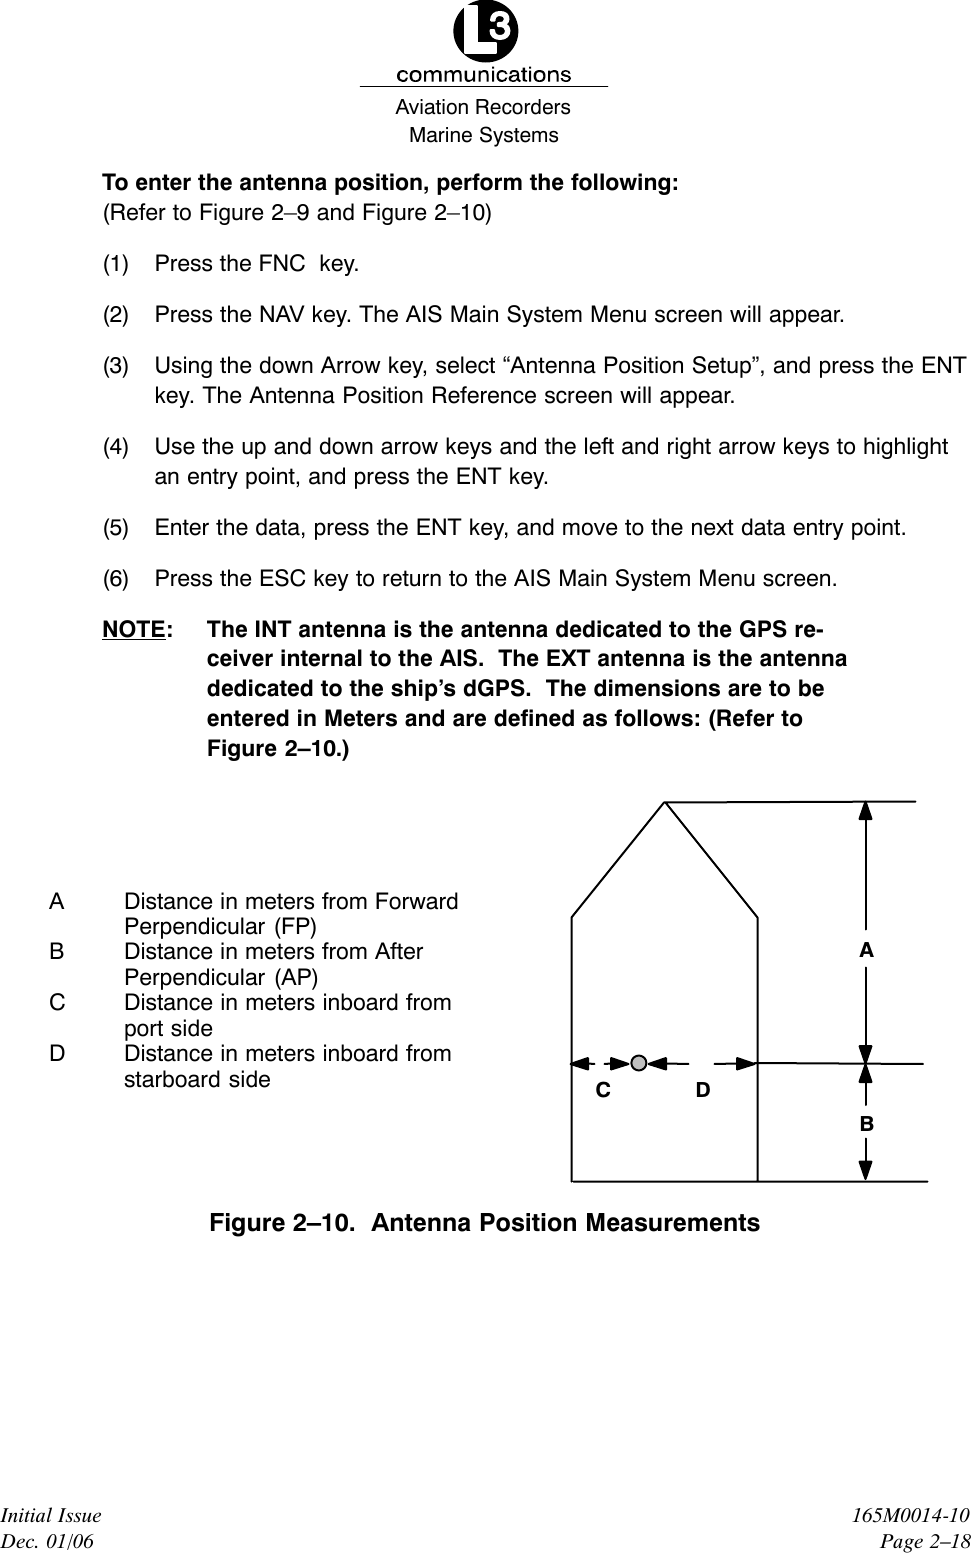 Marine SystemsAviation RecordersInitial IssueDec. 01/06165M0014-10Page 2–18To enter the antenna position, perform the following: (Refer to Figure 2–9 and Figure 2–10)(1) Press the FNC  key.(2) Press the NAV key. The AIS Main System Menu screen will appear.(3) Using the down Arrow key, select “Antenna Position Setup”, and press the ENTkey. The Antenna Position Reference screen will appear.(4) Use the up and down arrow keys and the left and right arrow keys to highlightan entry point, and press the ENT key.(5) Enter the data, press the ENT key, and move to the next data entry point.(6) Press the ESC key to return to the AIS Main System Menu screen.NOTE: The INT antenna is the antenna dedicated to the GPS re-ceiver internal to the AIS.  The EXT antenna is the antennadedicated to the ship’s dGPS.  The dimensions are to beentered in Meters and are defined as follows: (Refer toFigure 2–10.)ABCDA Distance in meters from ForwardPerpendicular (FP)B Distance in meters from AfterPerpendicular (AP)C Distance in meters inboard fromport sideD Distance in meters inboard fromstarboard sideFigure 2–10.  Antenna Position Measurements